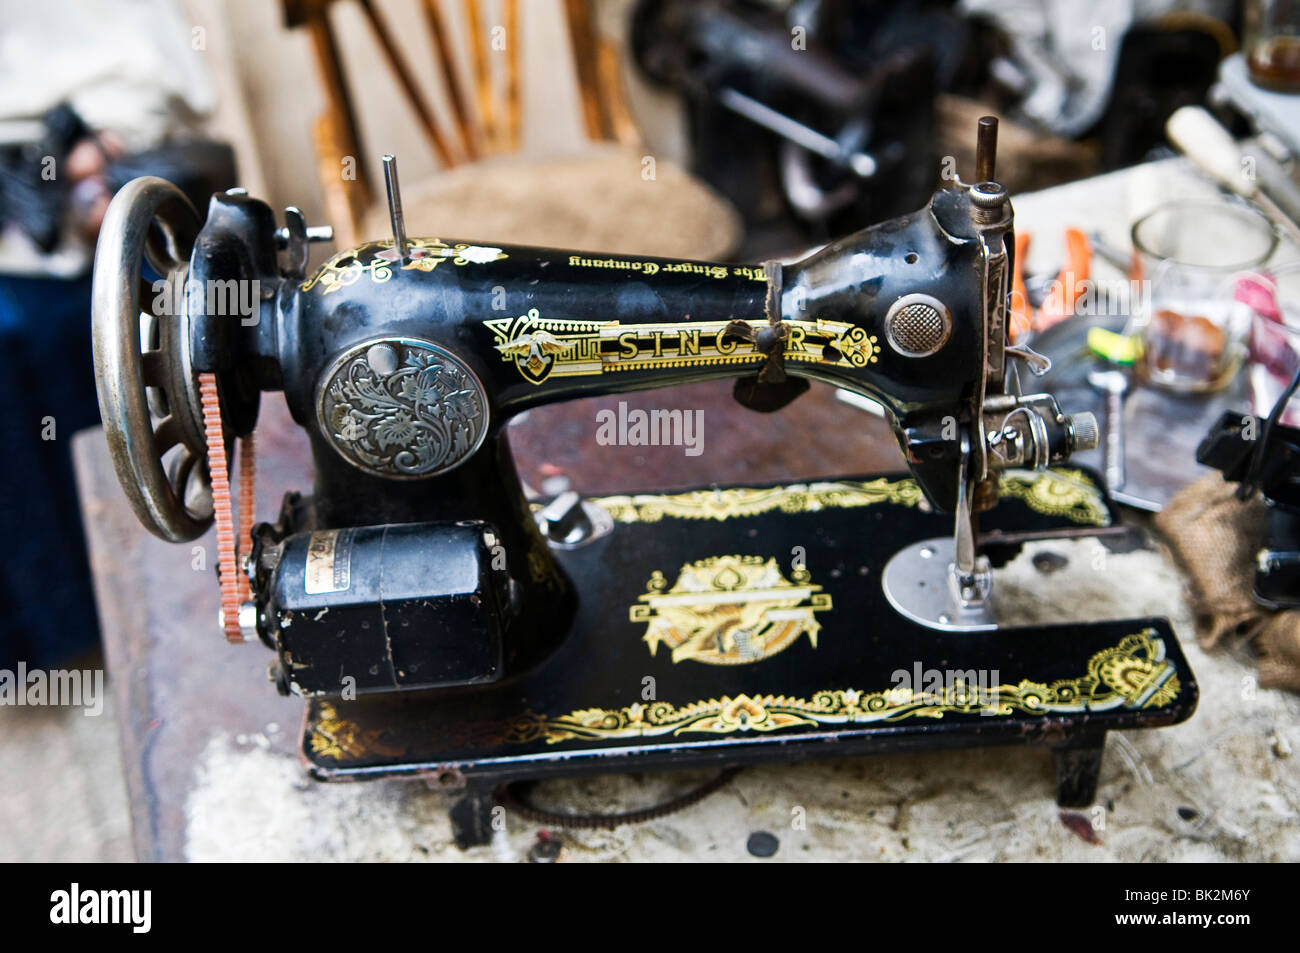 An old Singer sowing machine is still in use in Cairo Stock Photo - Alamy